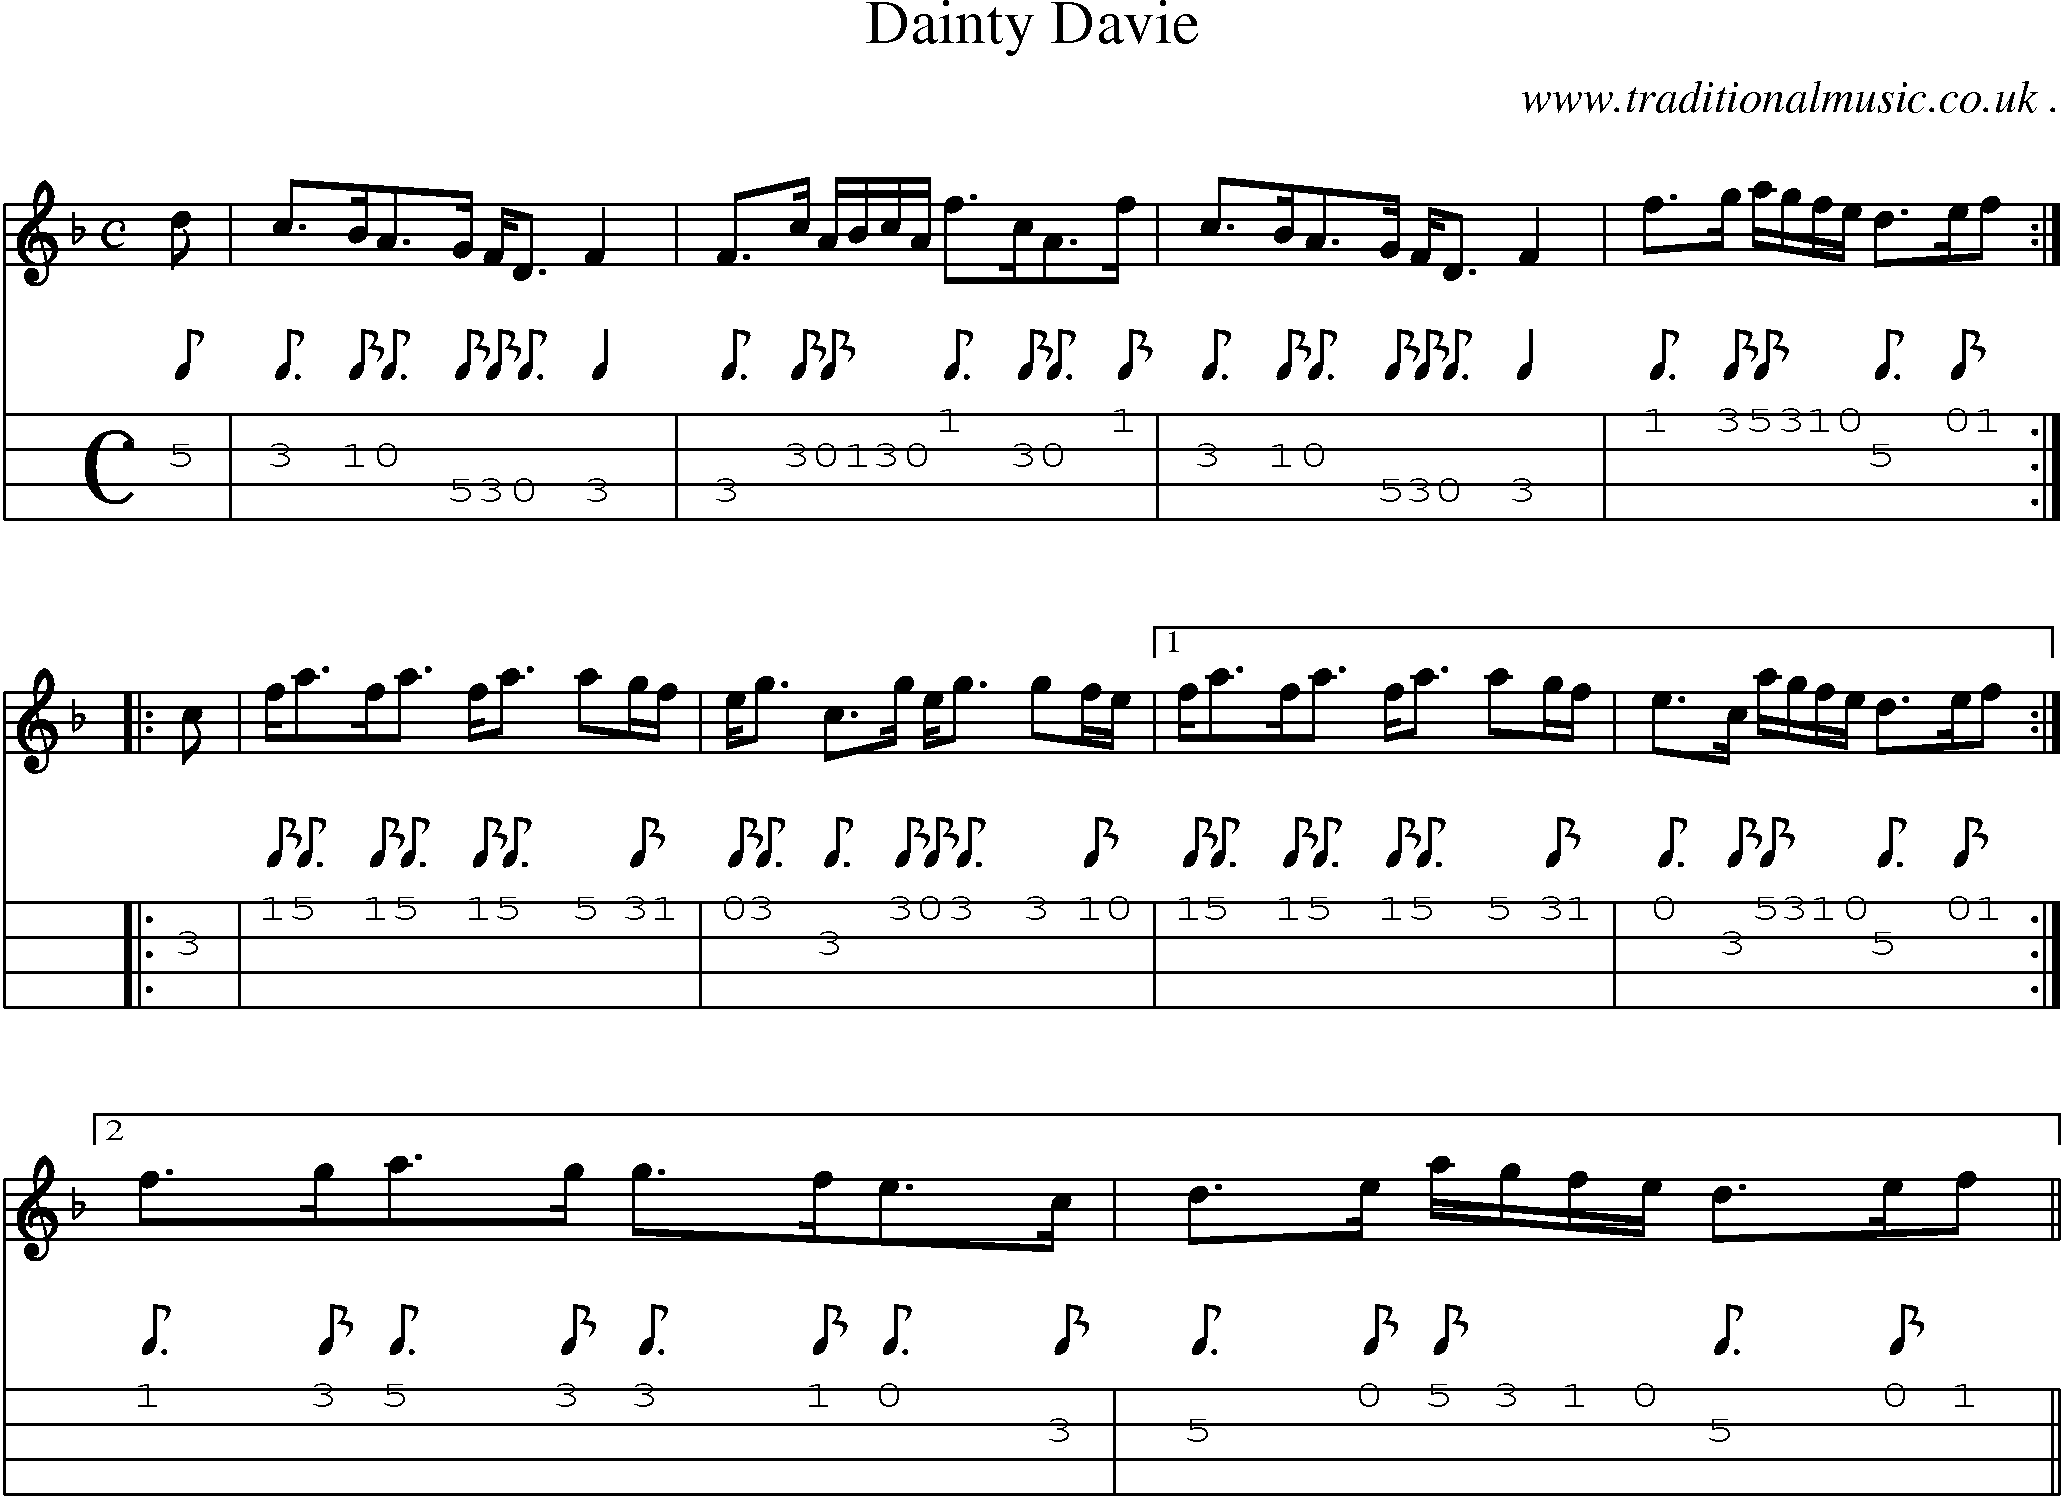 Sheet-music  score, Chords and Mandolin Tabs for Dainty Davie